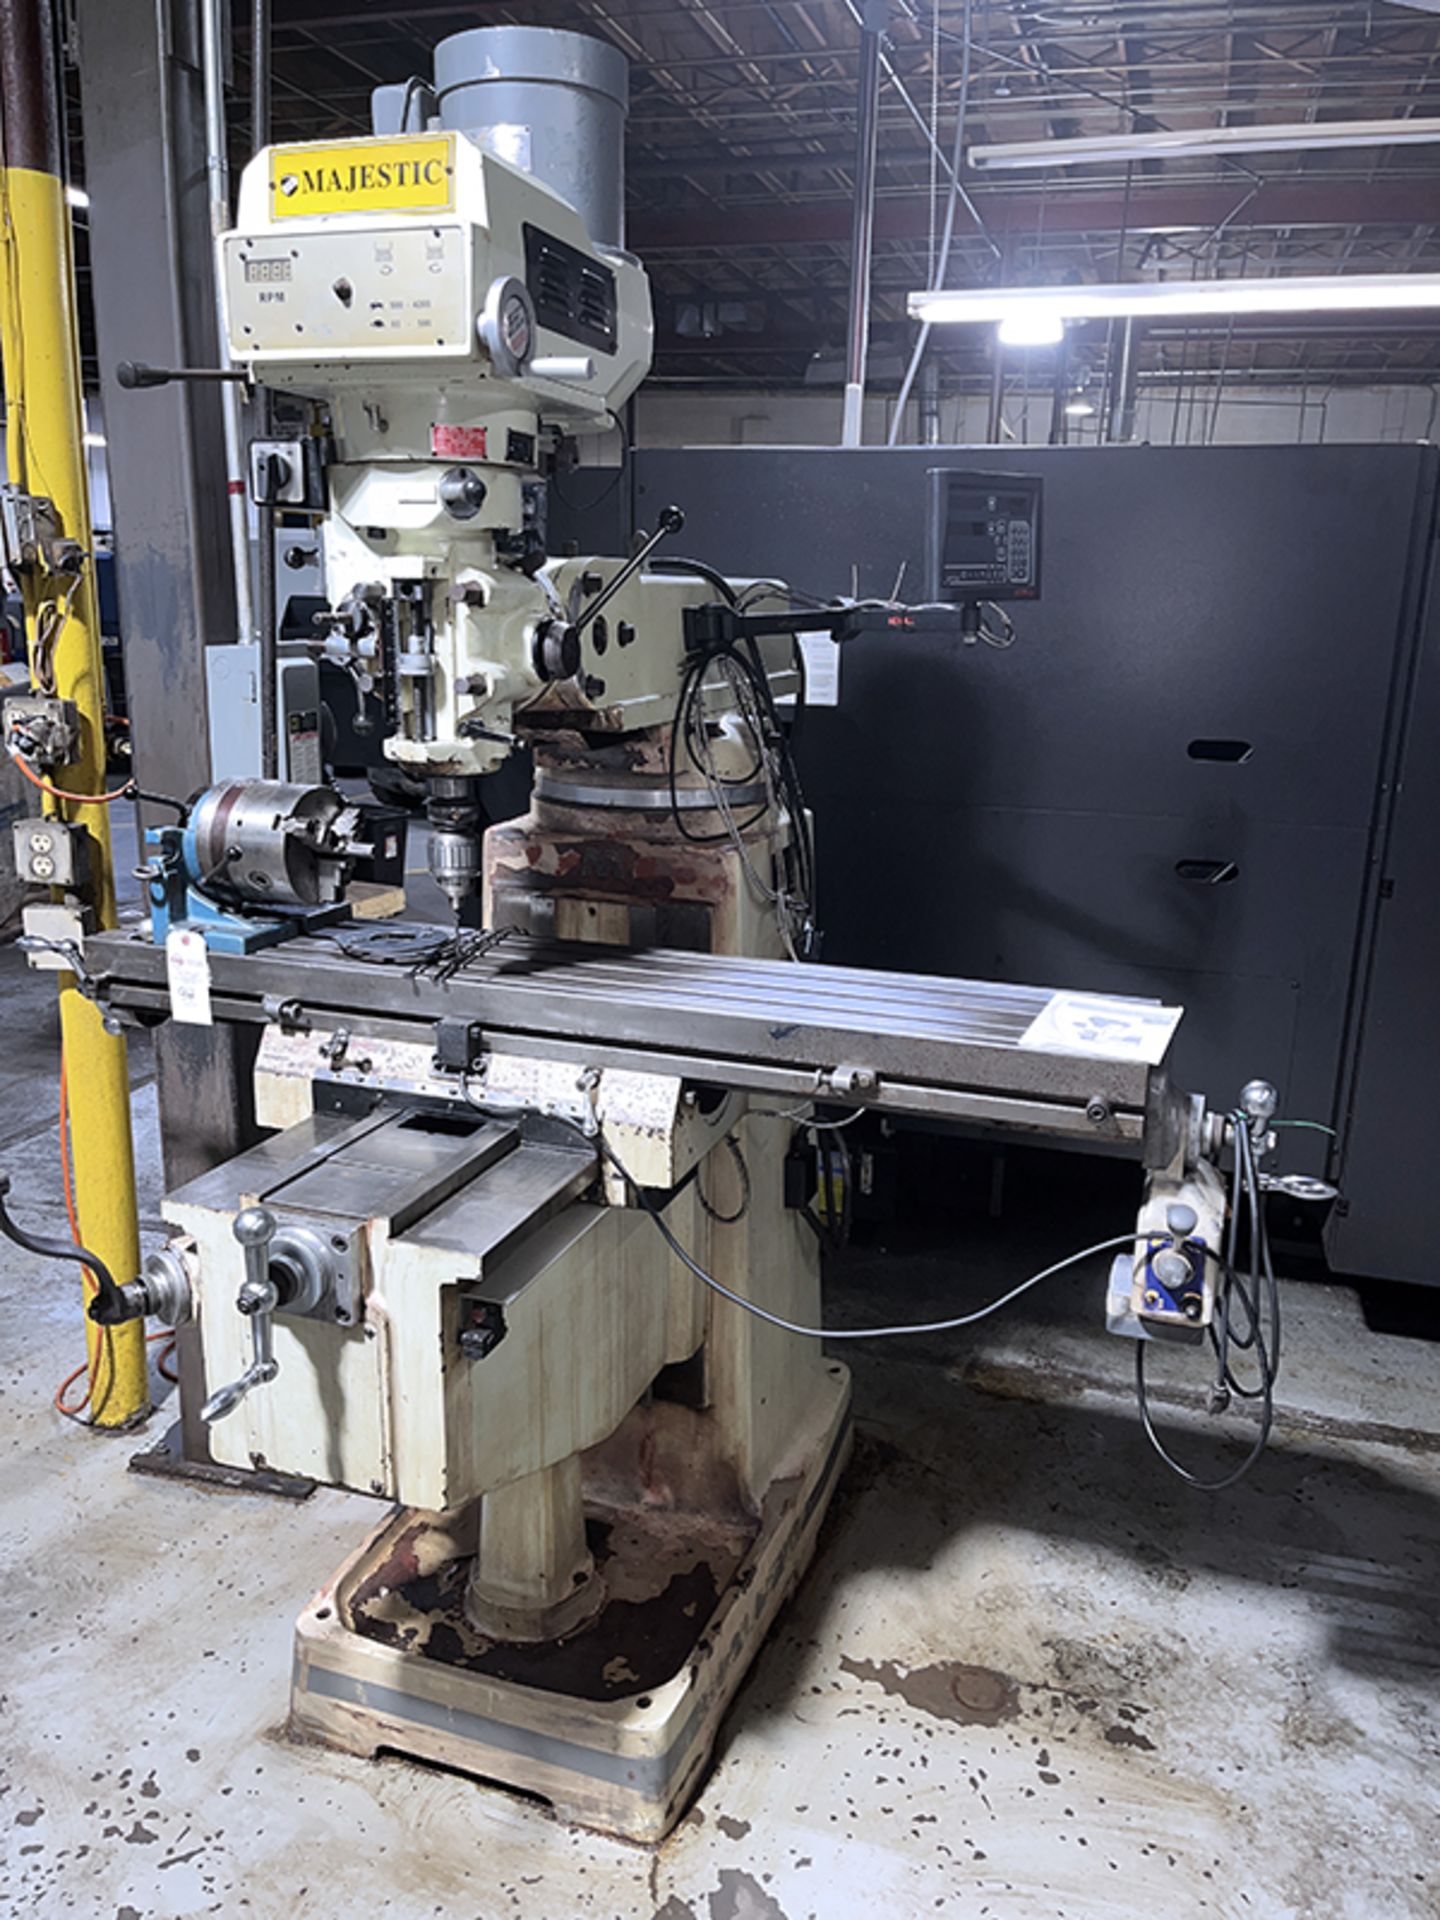 Majestic RM1054 V3 Vertical Milling Machine (2008) - Image 2 of 13